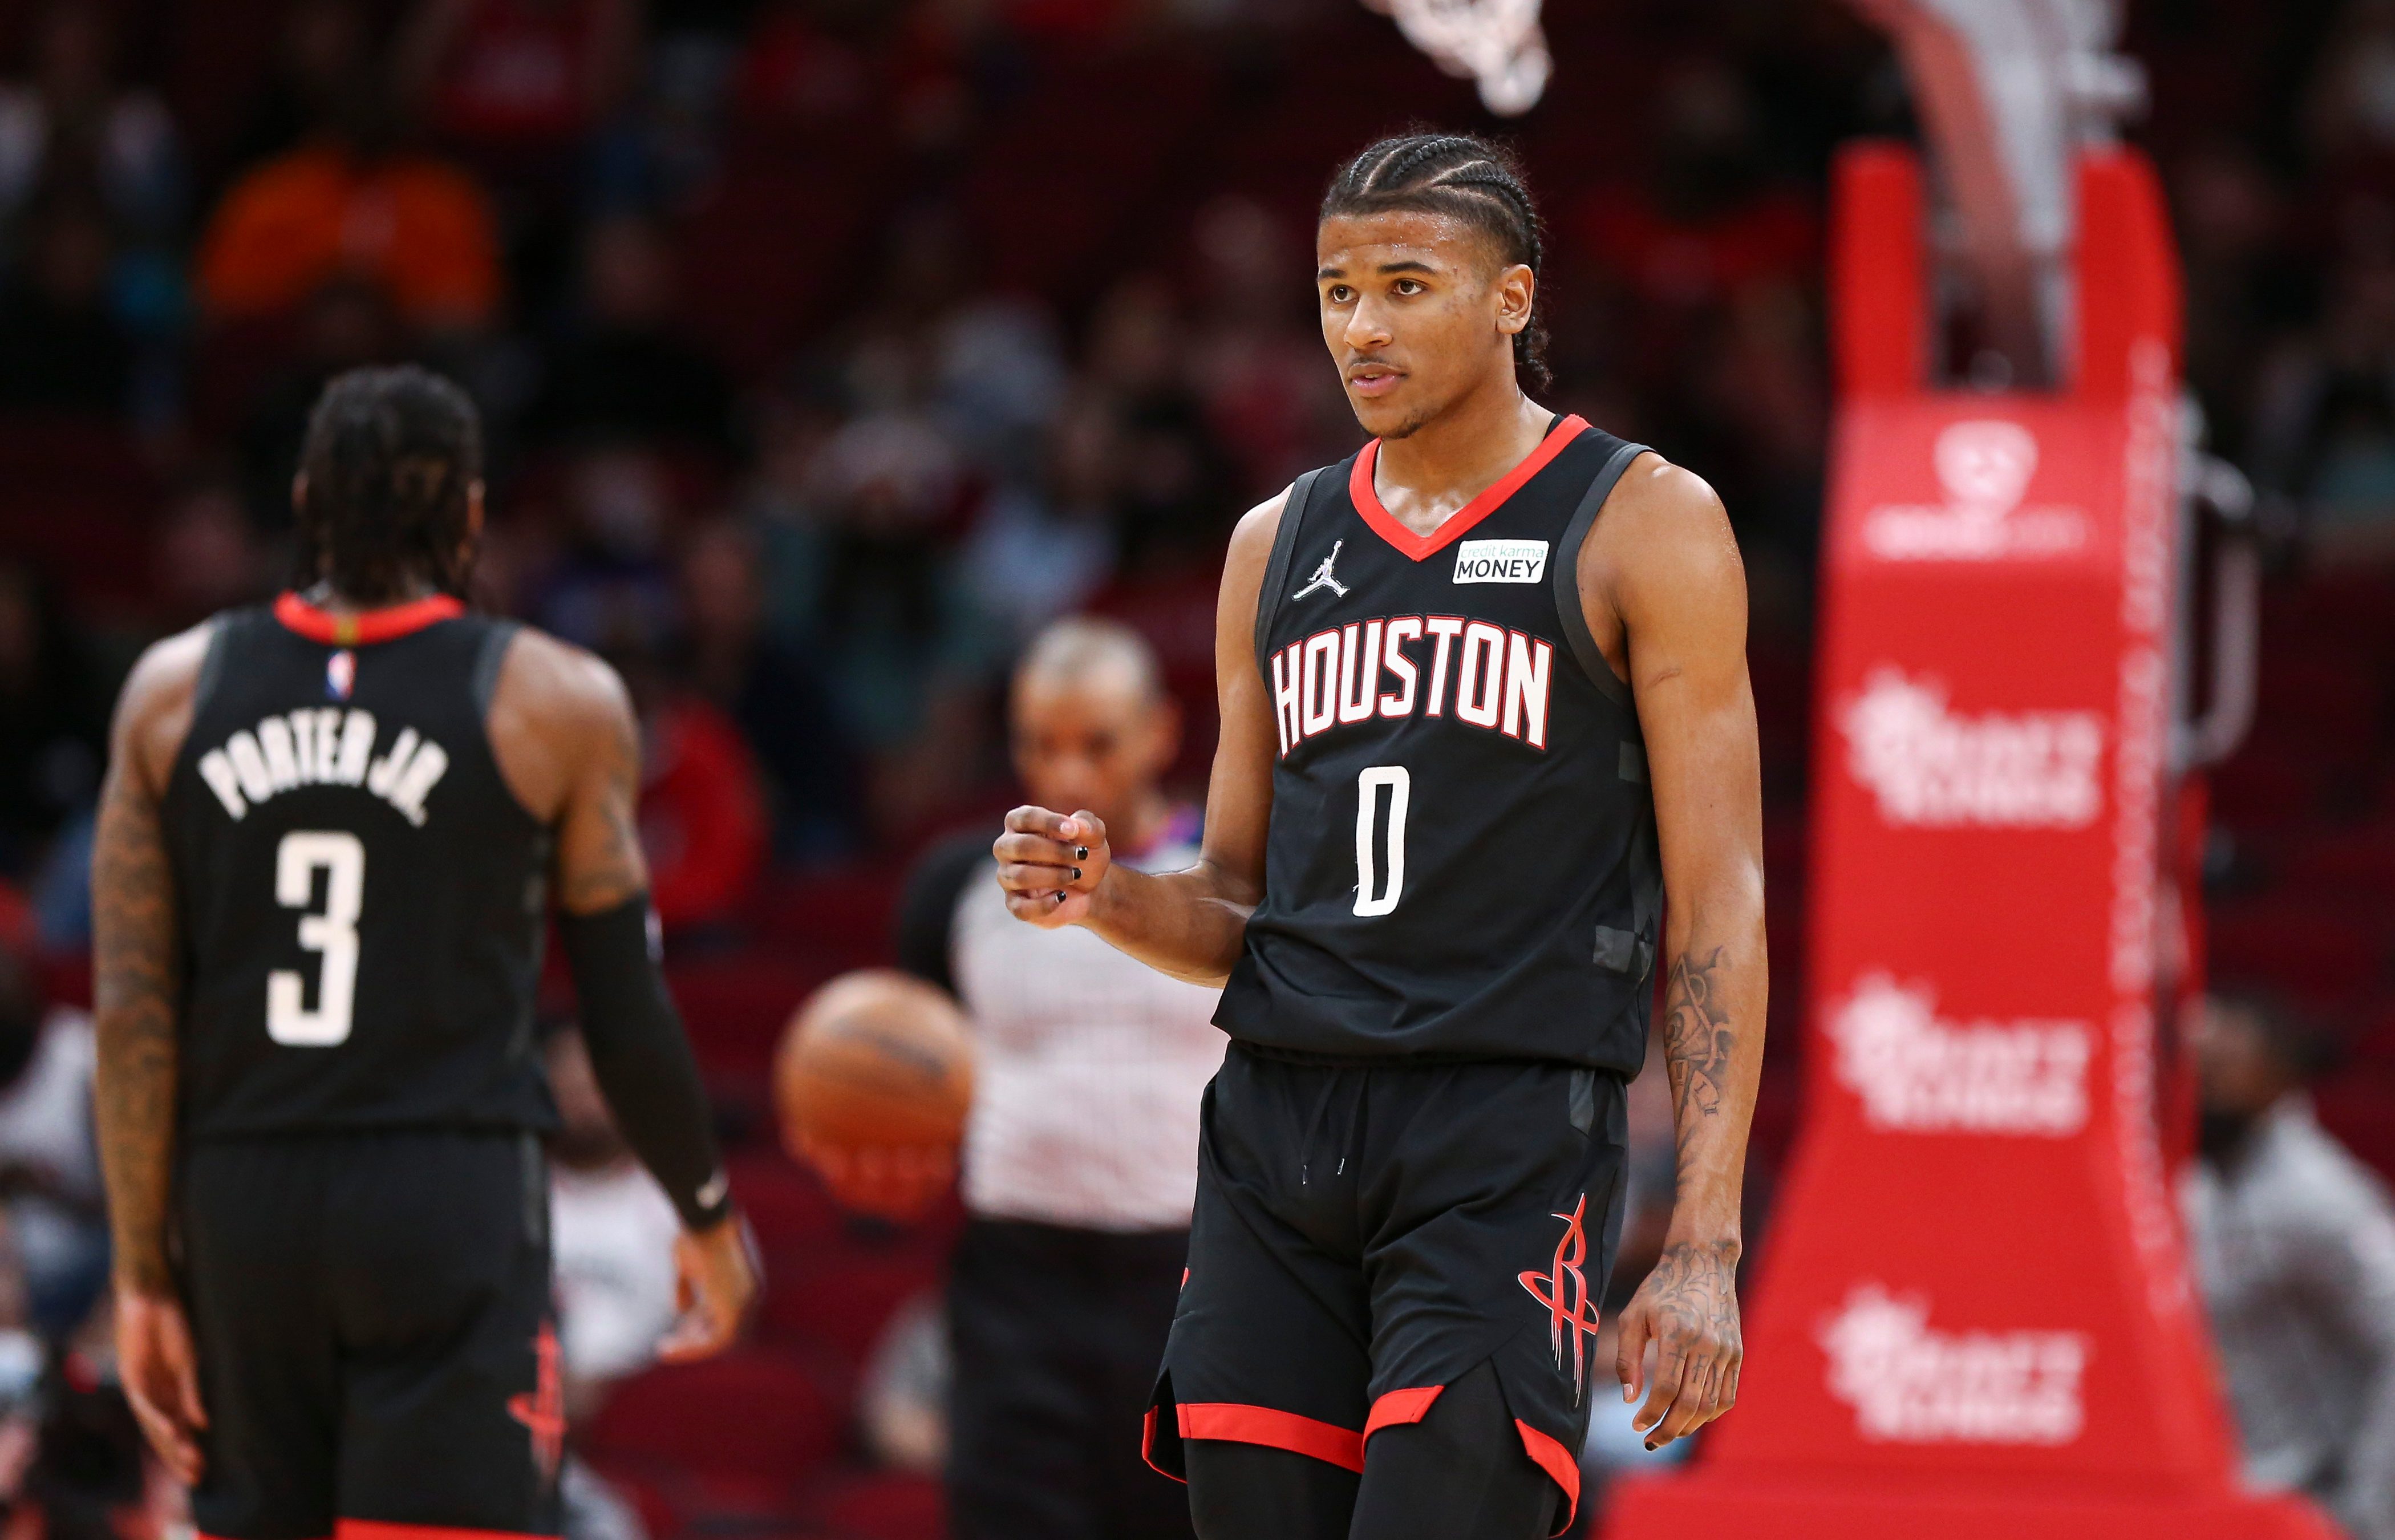 Rockets rally, take down Bulls to end 15-game skid